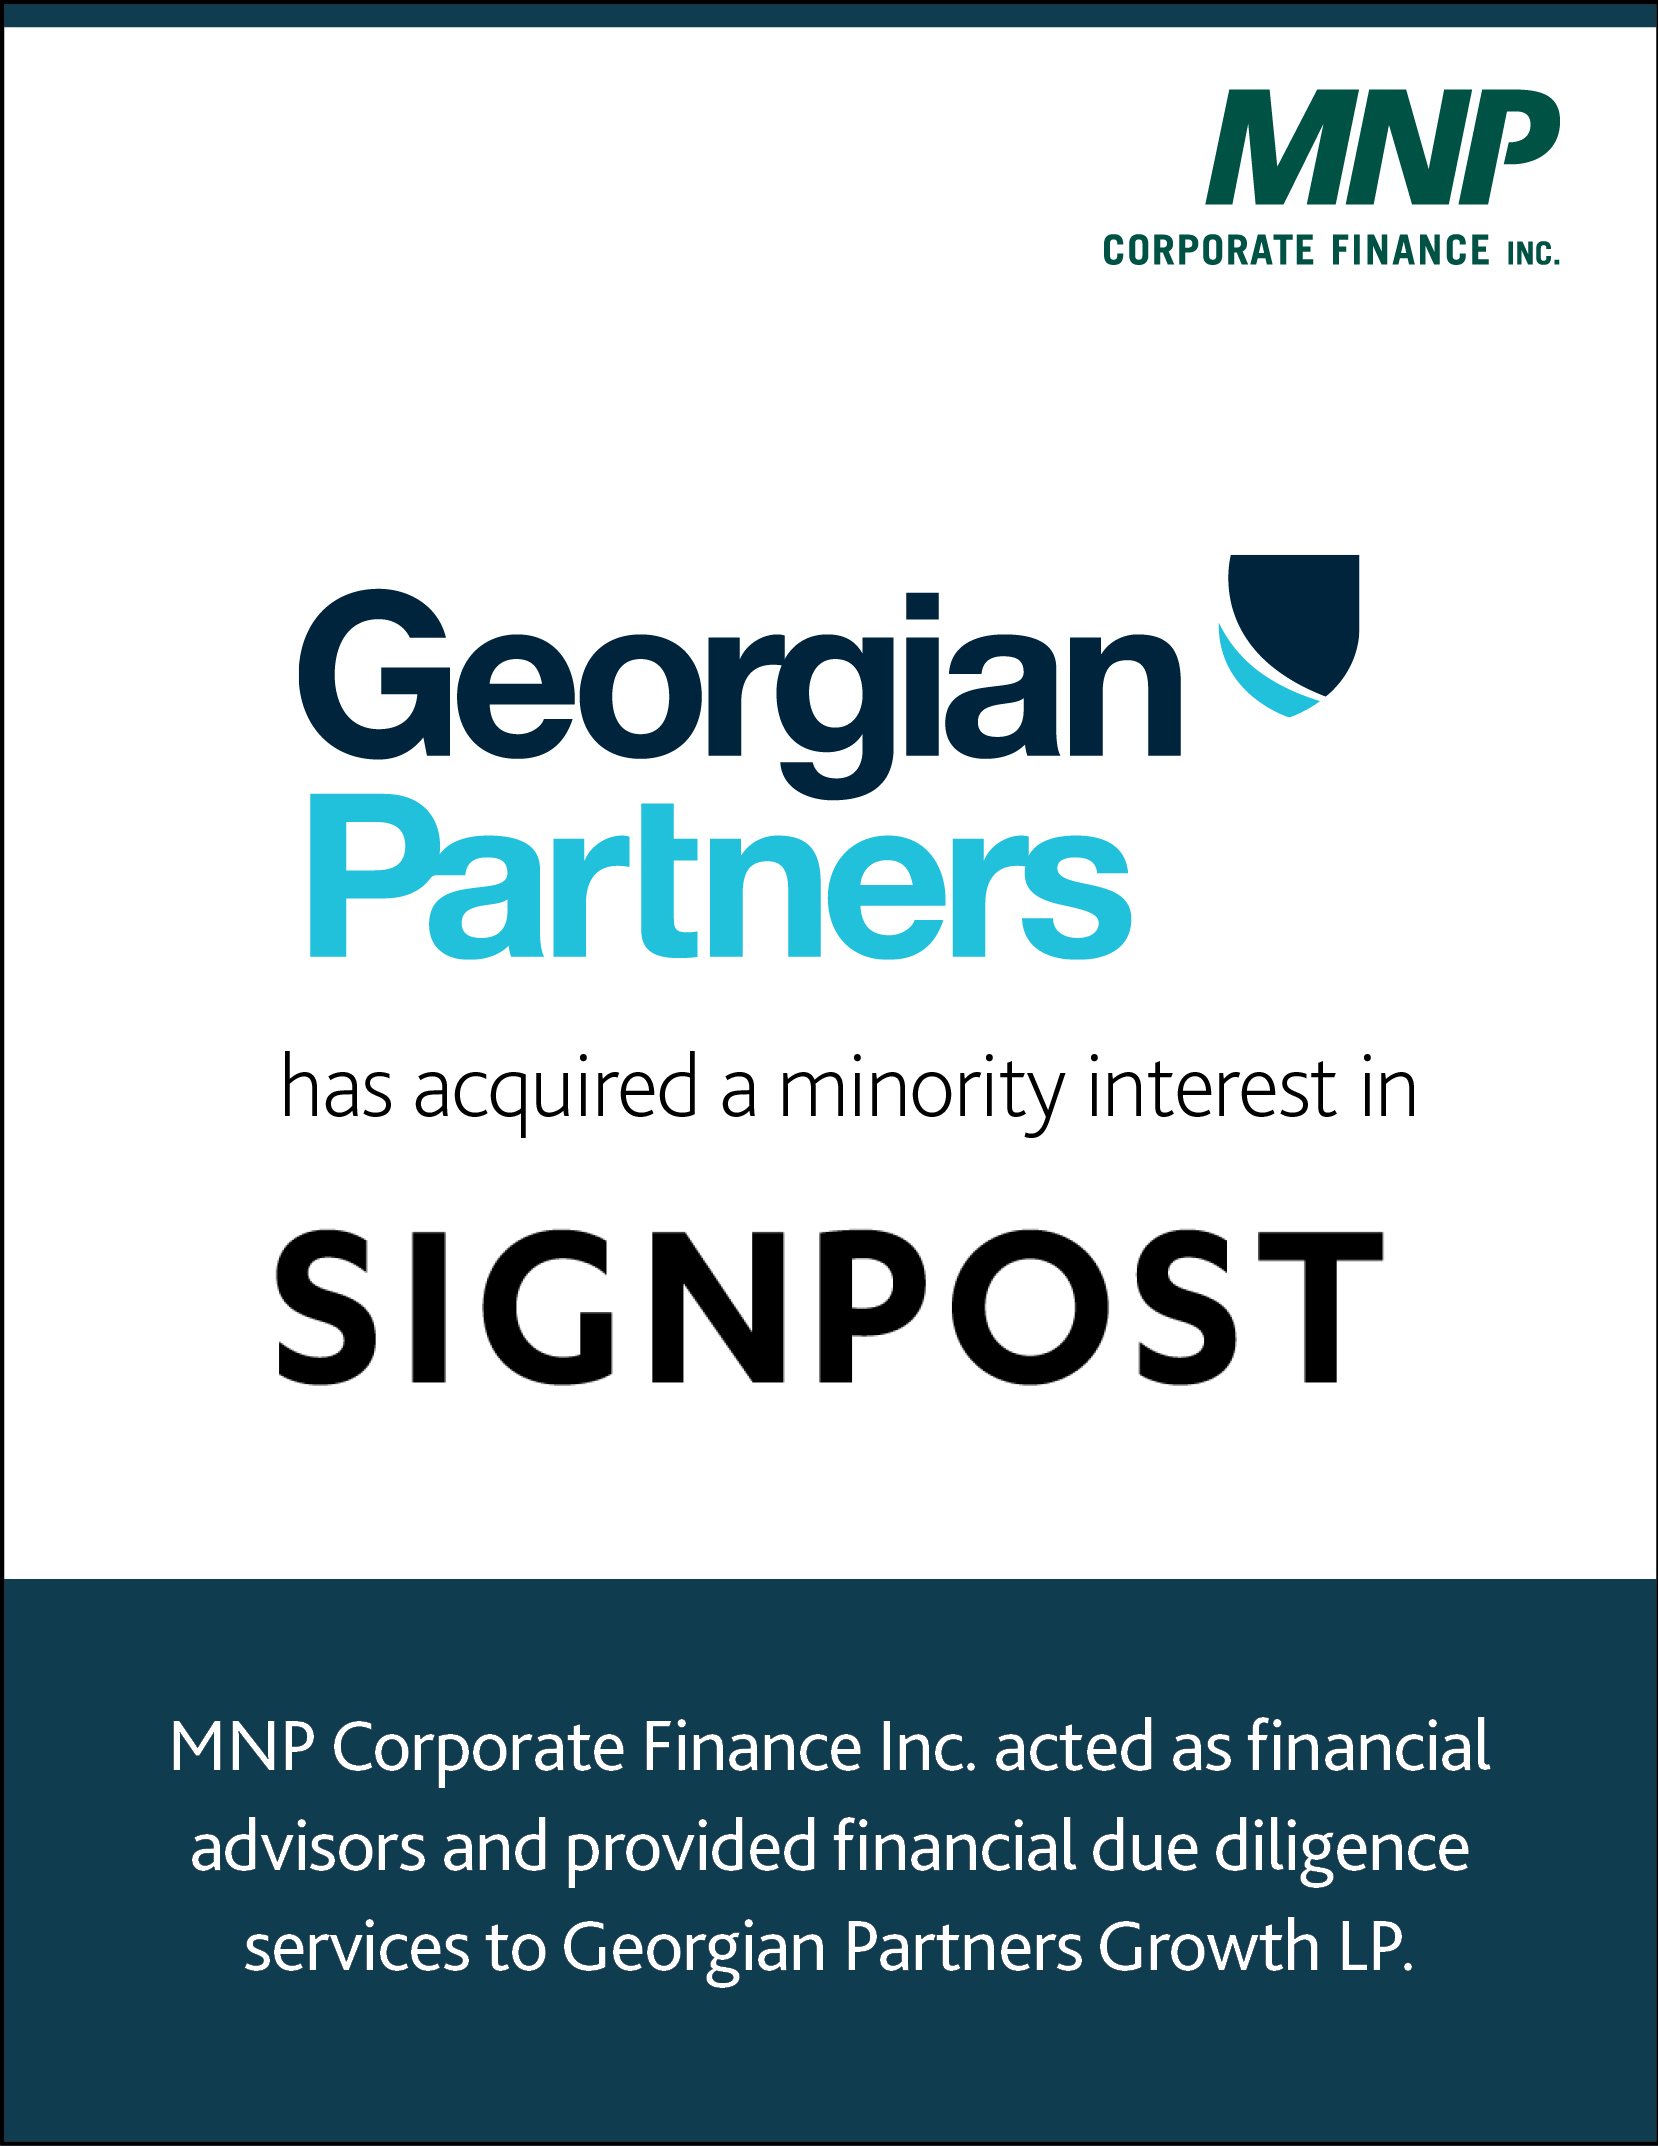 Georgian Partners Growth LP has acquired a minority interest in Signpost, Inc.